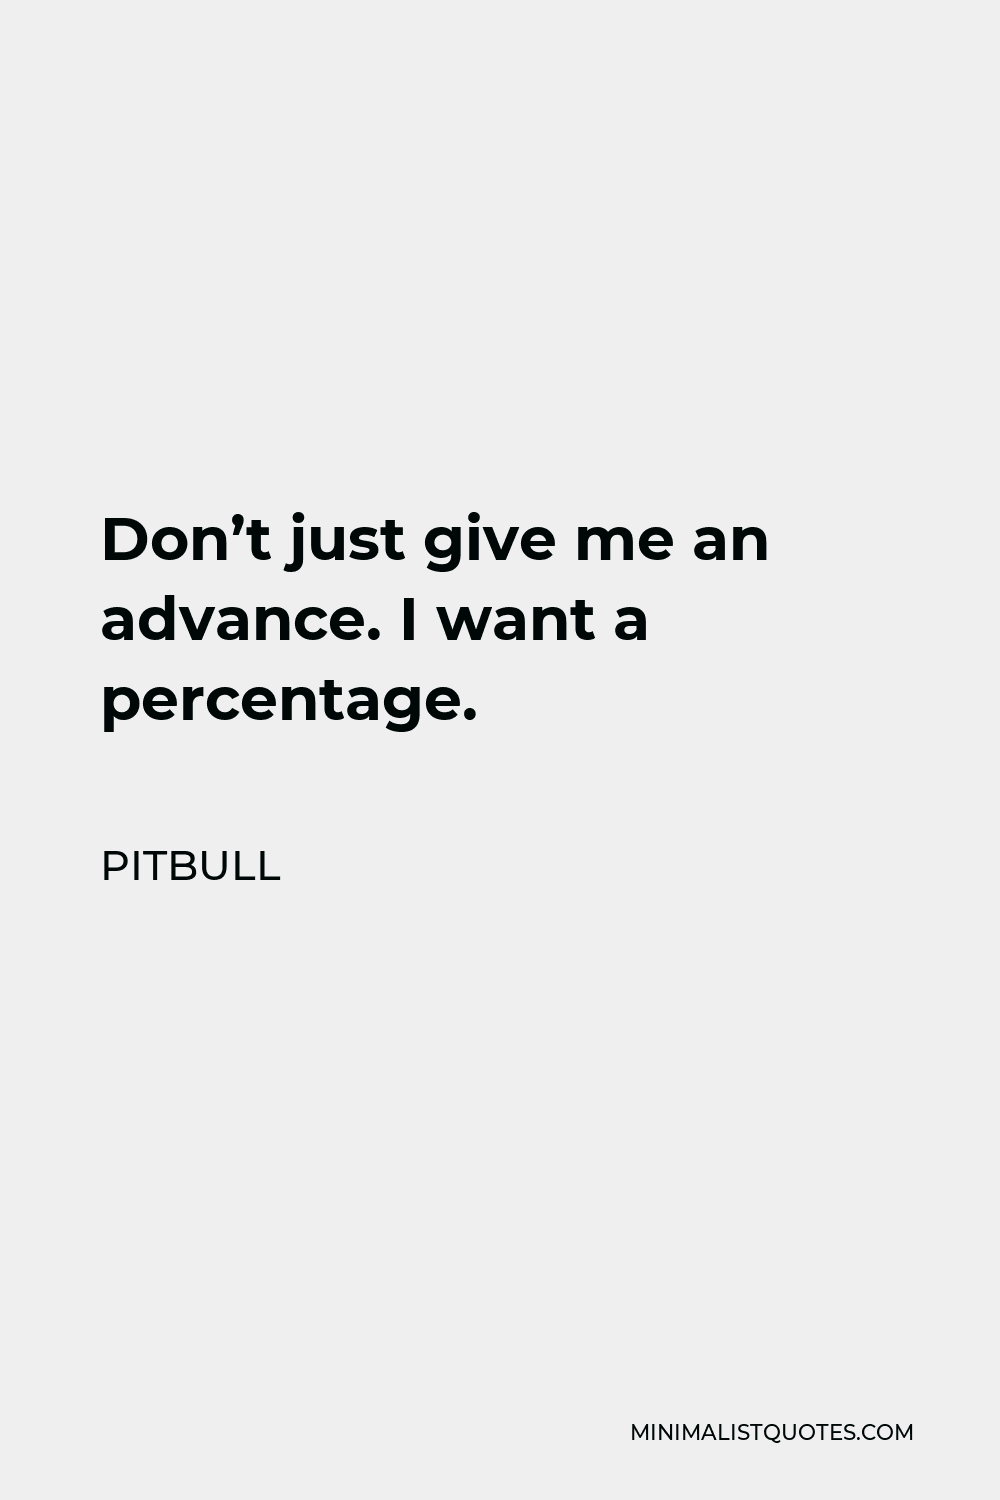 Pitbull Quote - Don’t just give me an advance. I want a percentage.